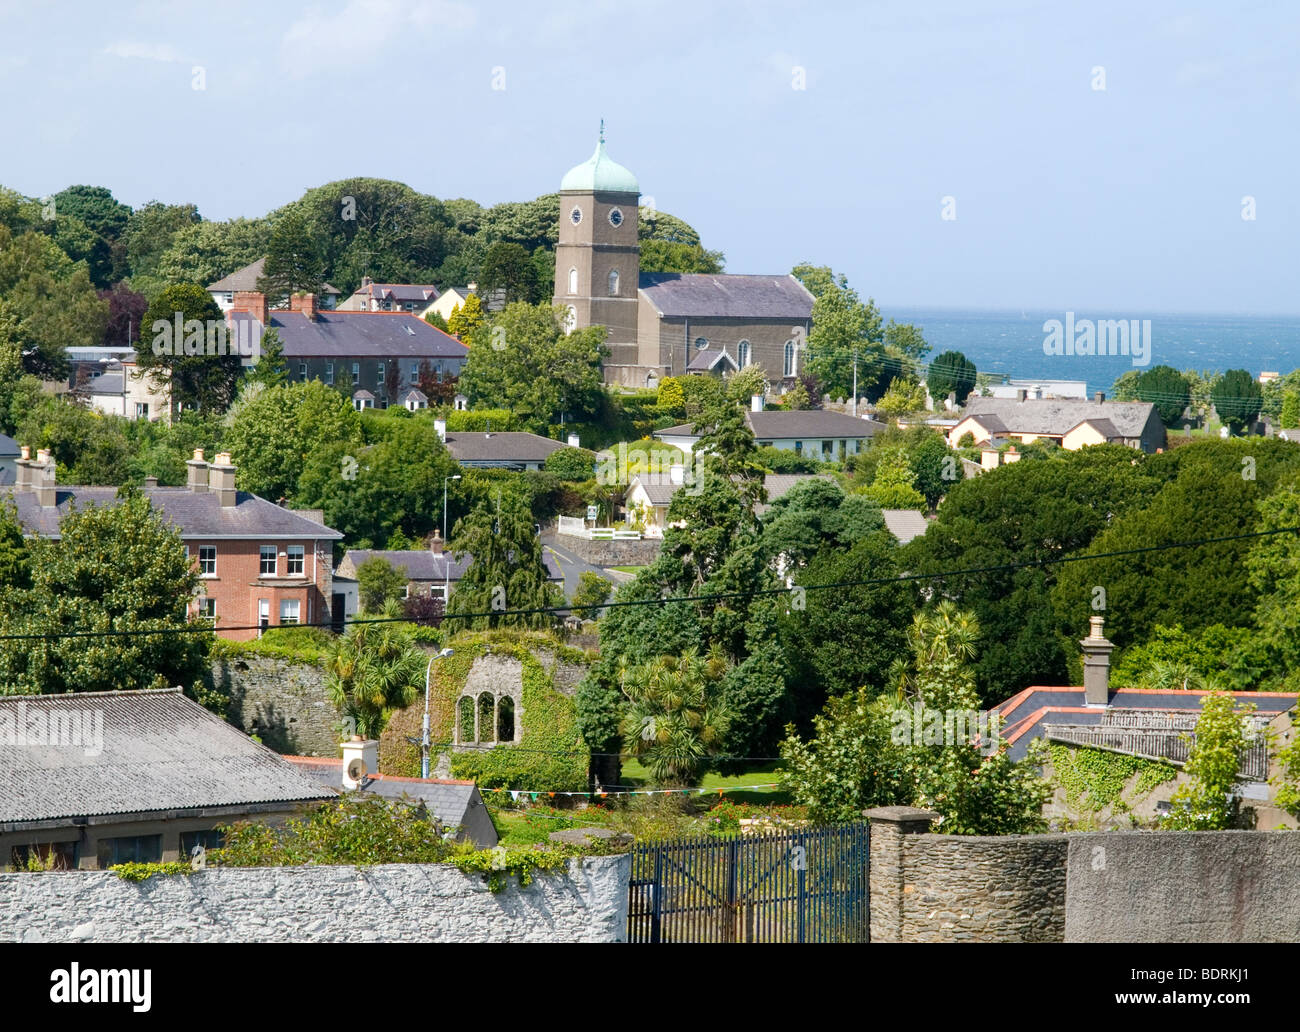 A view of houses on the hillside out towards the sea in the town of Wicklow, County Wicklow Ireland Stock Photo